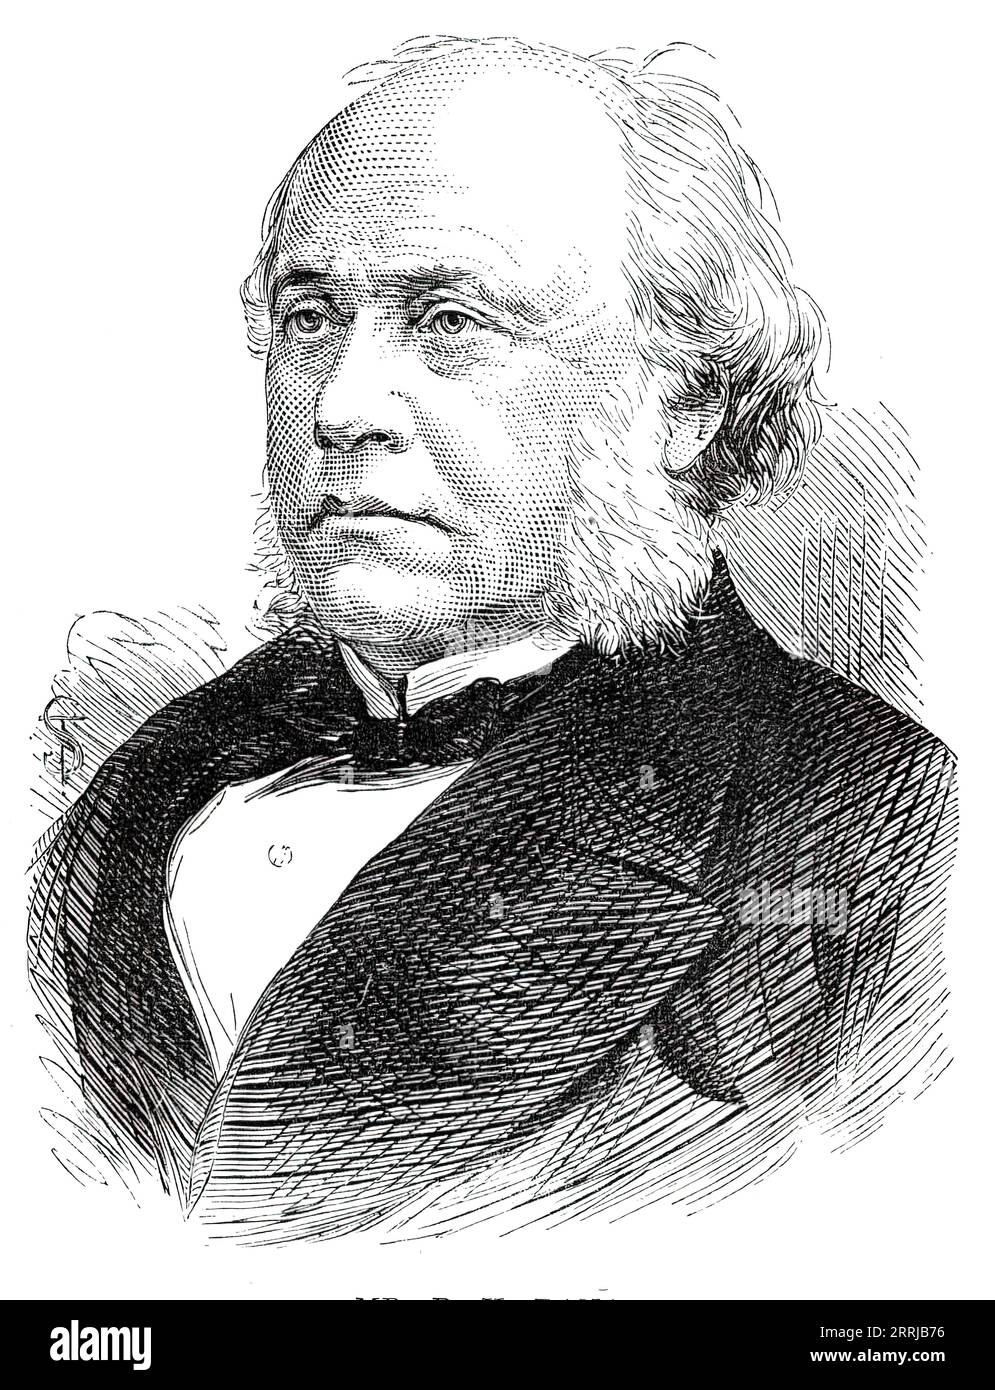 Mr. R. H. Dana, 1876. 'The Senate of the United States has rejected, for party or personal reasons, President Grant's appointment of this gentleman...as American Minister in London...At the age of nineteen, Mr. R. H. Dana, being compelled to relinquish his studies at Harvard in consequence of the failure of his eyesight, went to sea in a merchant-vessel as a common sailor. Upon his return he wrote and published a very graphic description of his voyages in the well-known book entitled &quot;Two Years Before the Mast.&quot; His sight being completely restored, he resumed his studies, graduated w Stock Photo